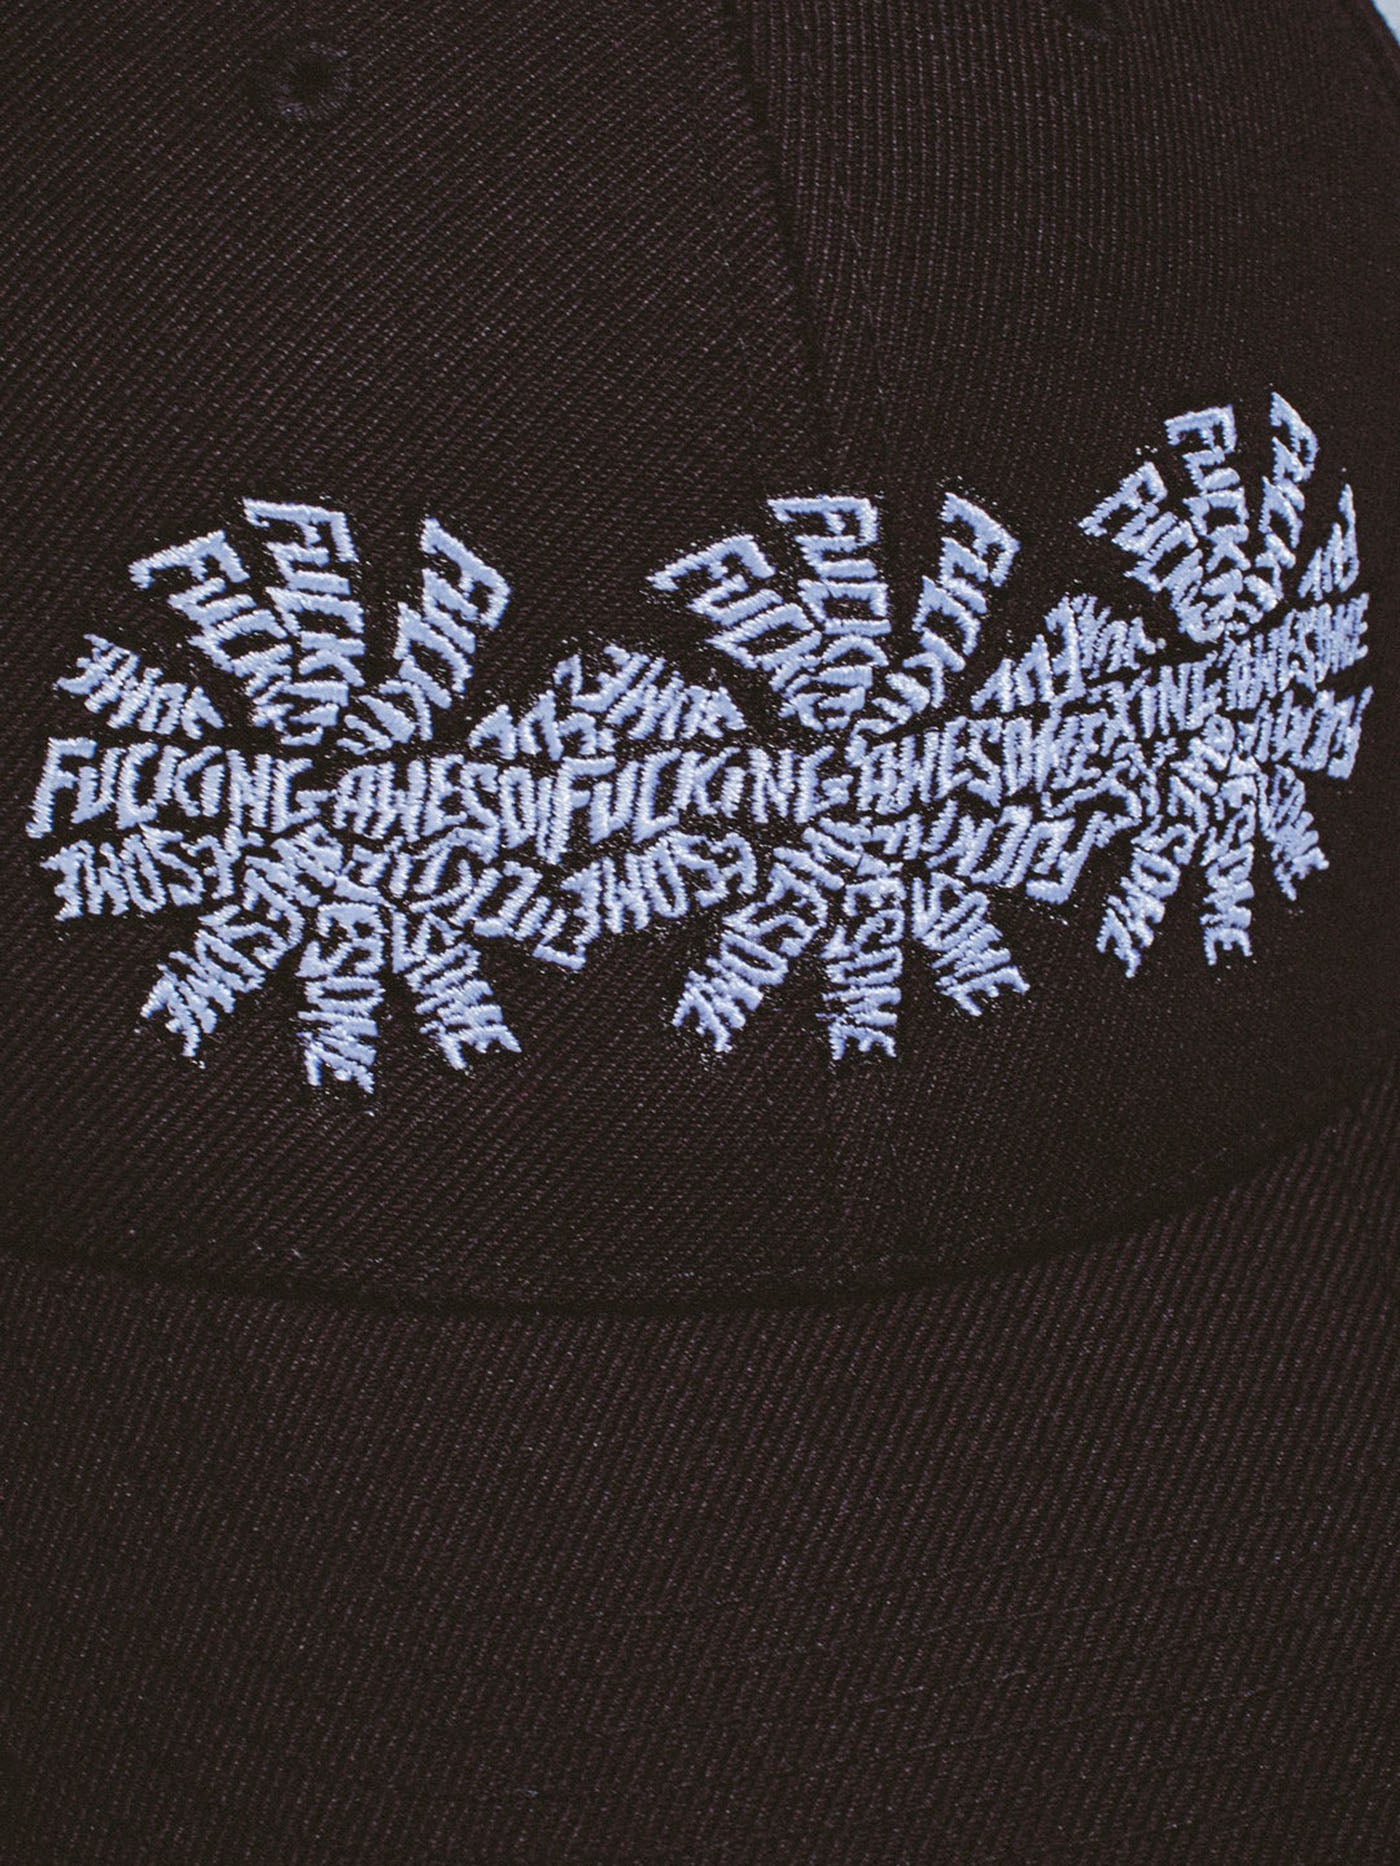 Fucking Awesome 3 Spiral Snapback Hat | EMPIRE